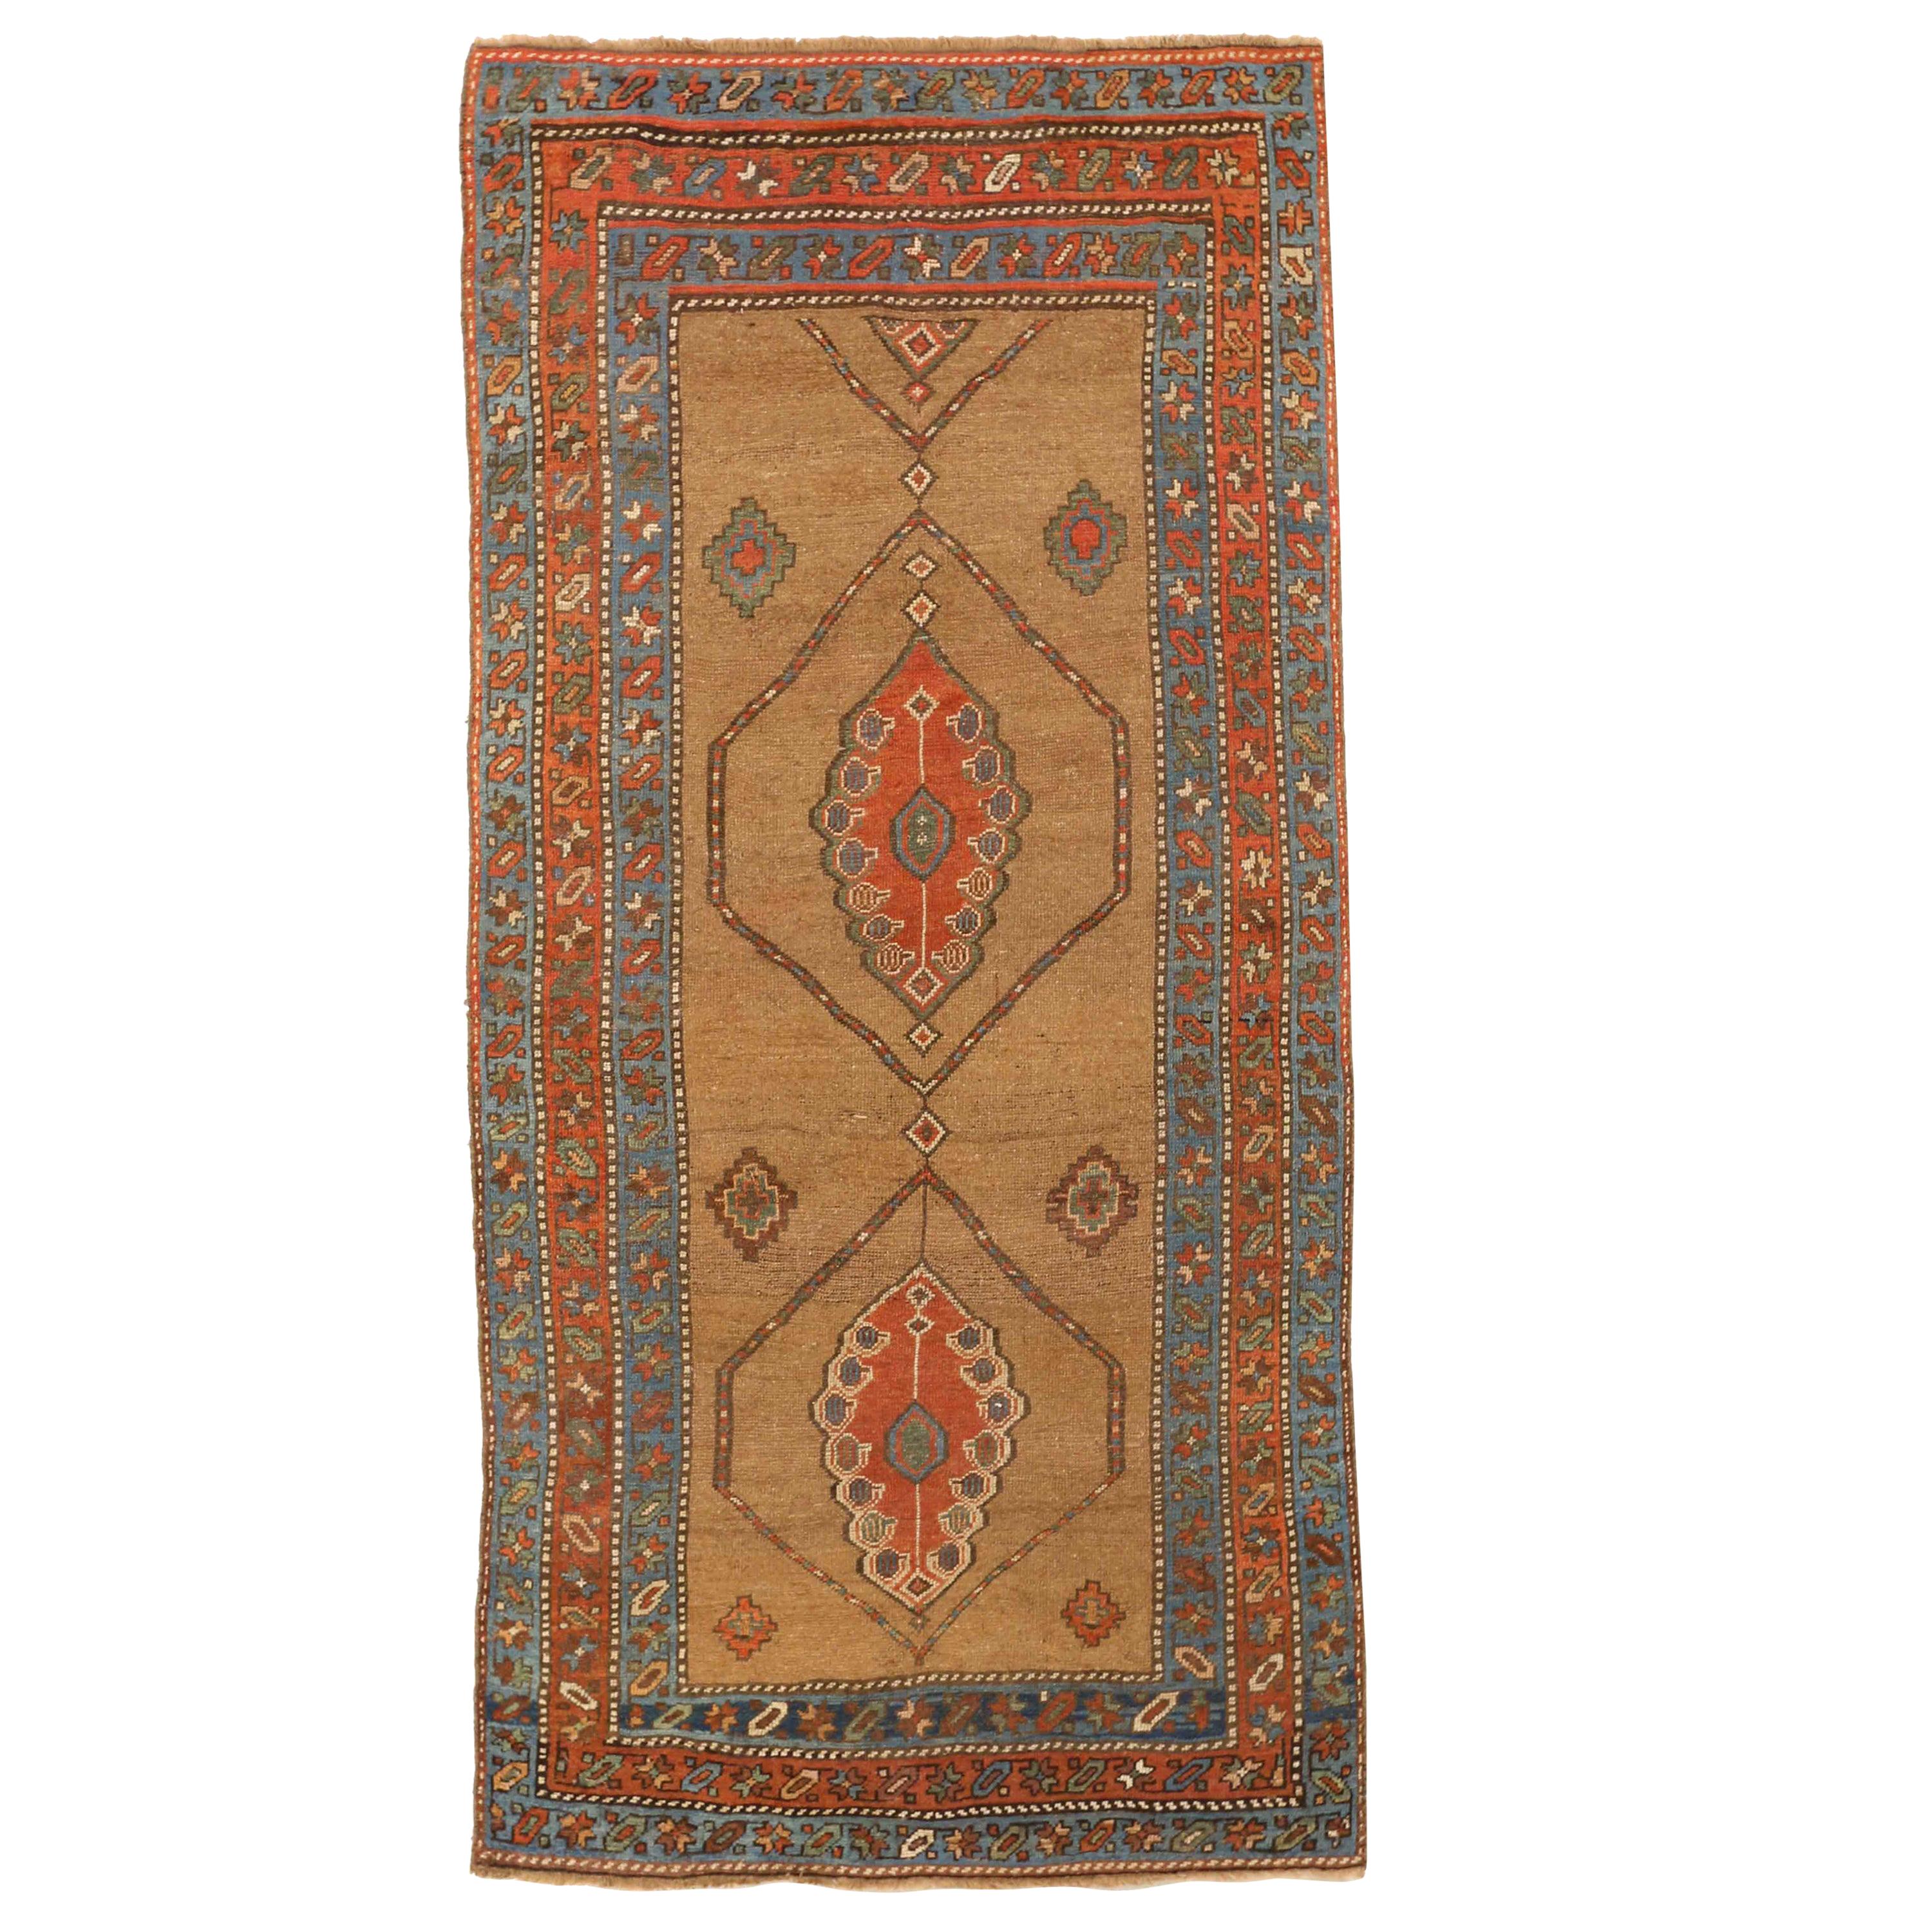 Antique Persian Kurdish Rug with Mixed Floral and Geometric Patterns